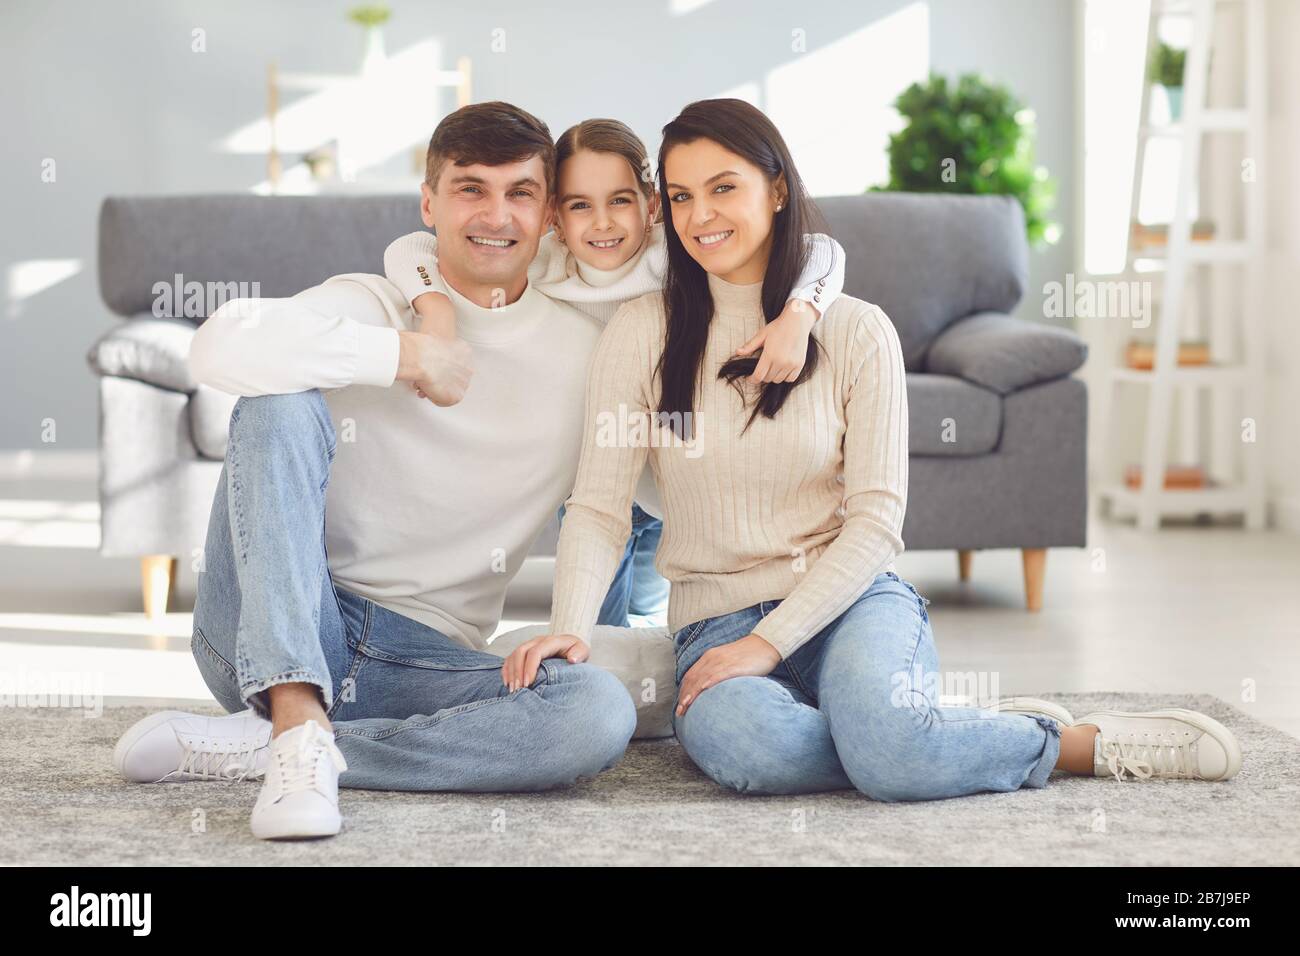 Happy smiling family hugging sitting on floor in room at home. Stock Photo